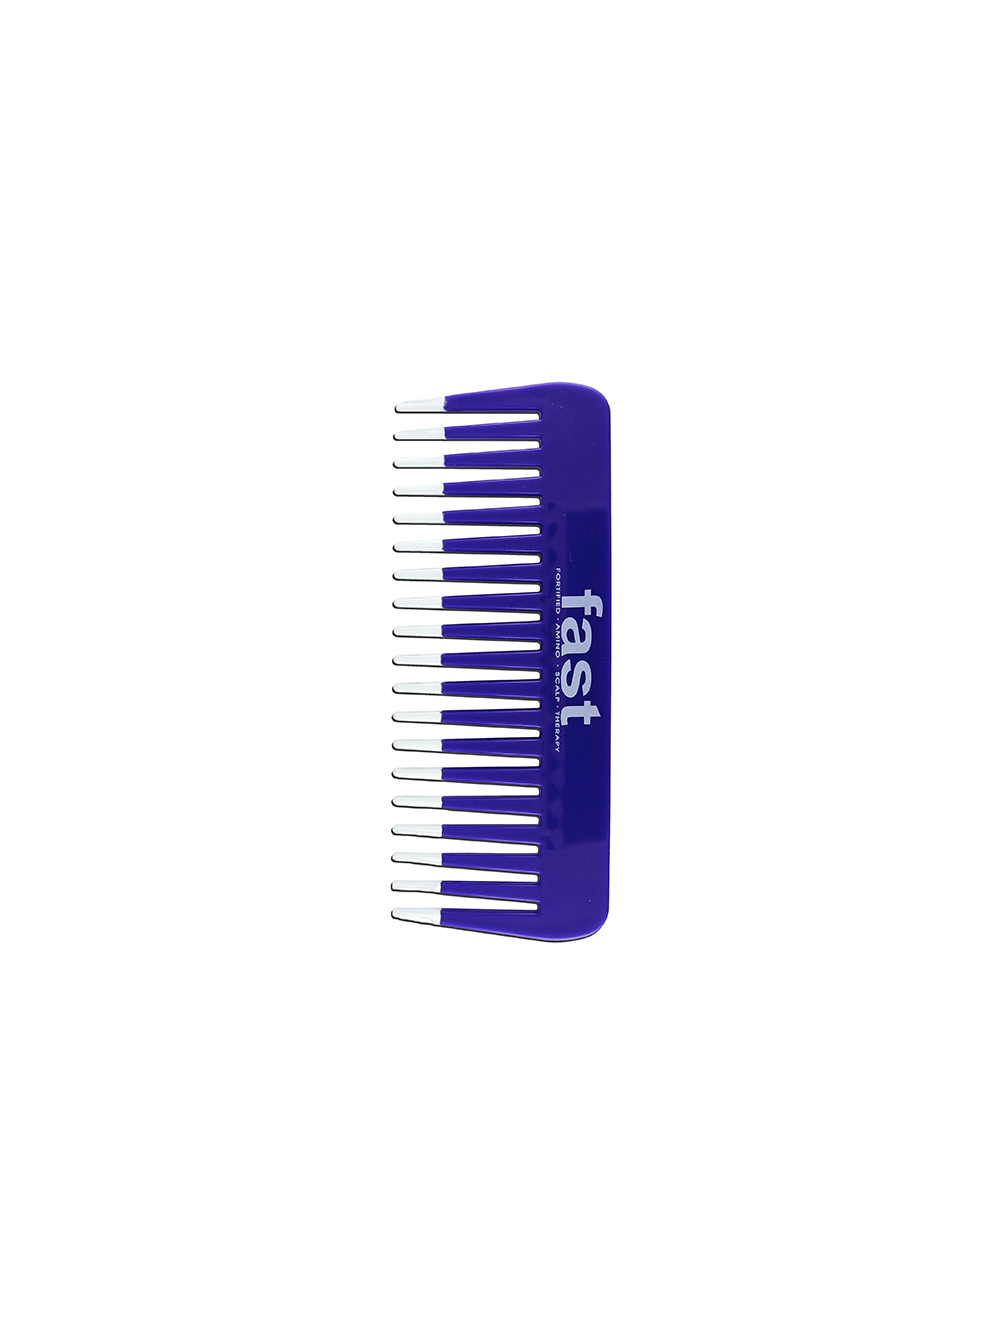 Fast Wide Tooth Comb- Buy 10 Get 2 Free